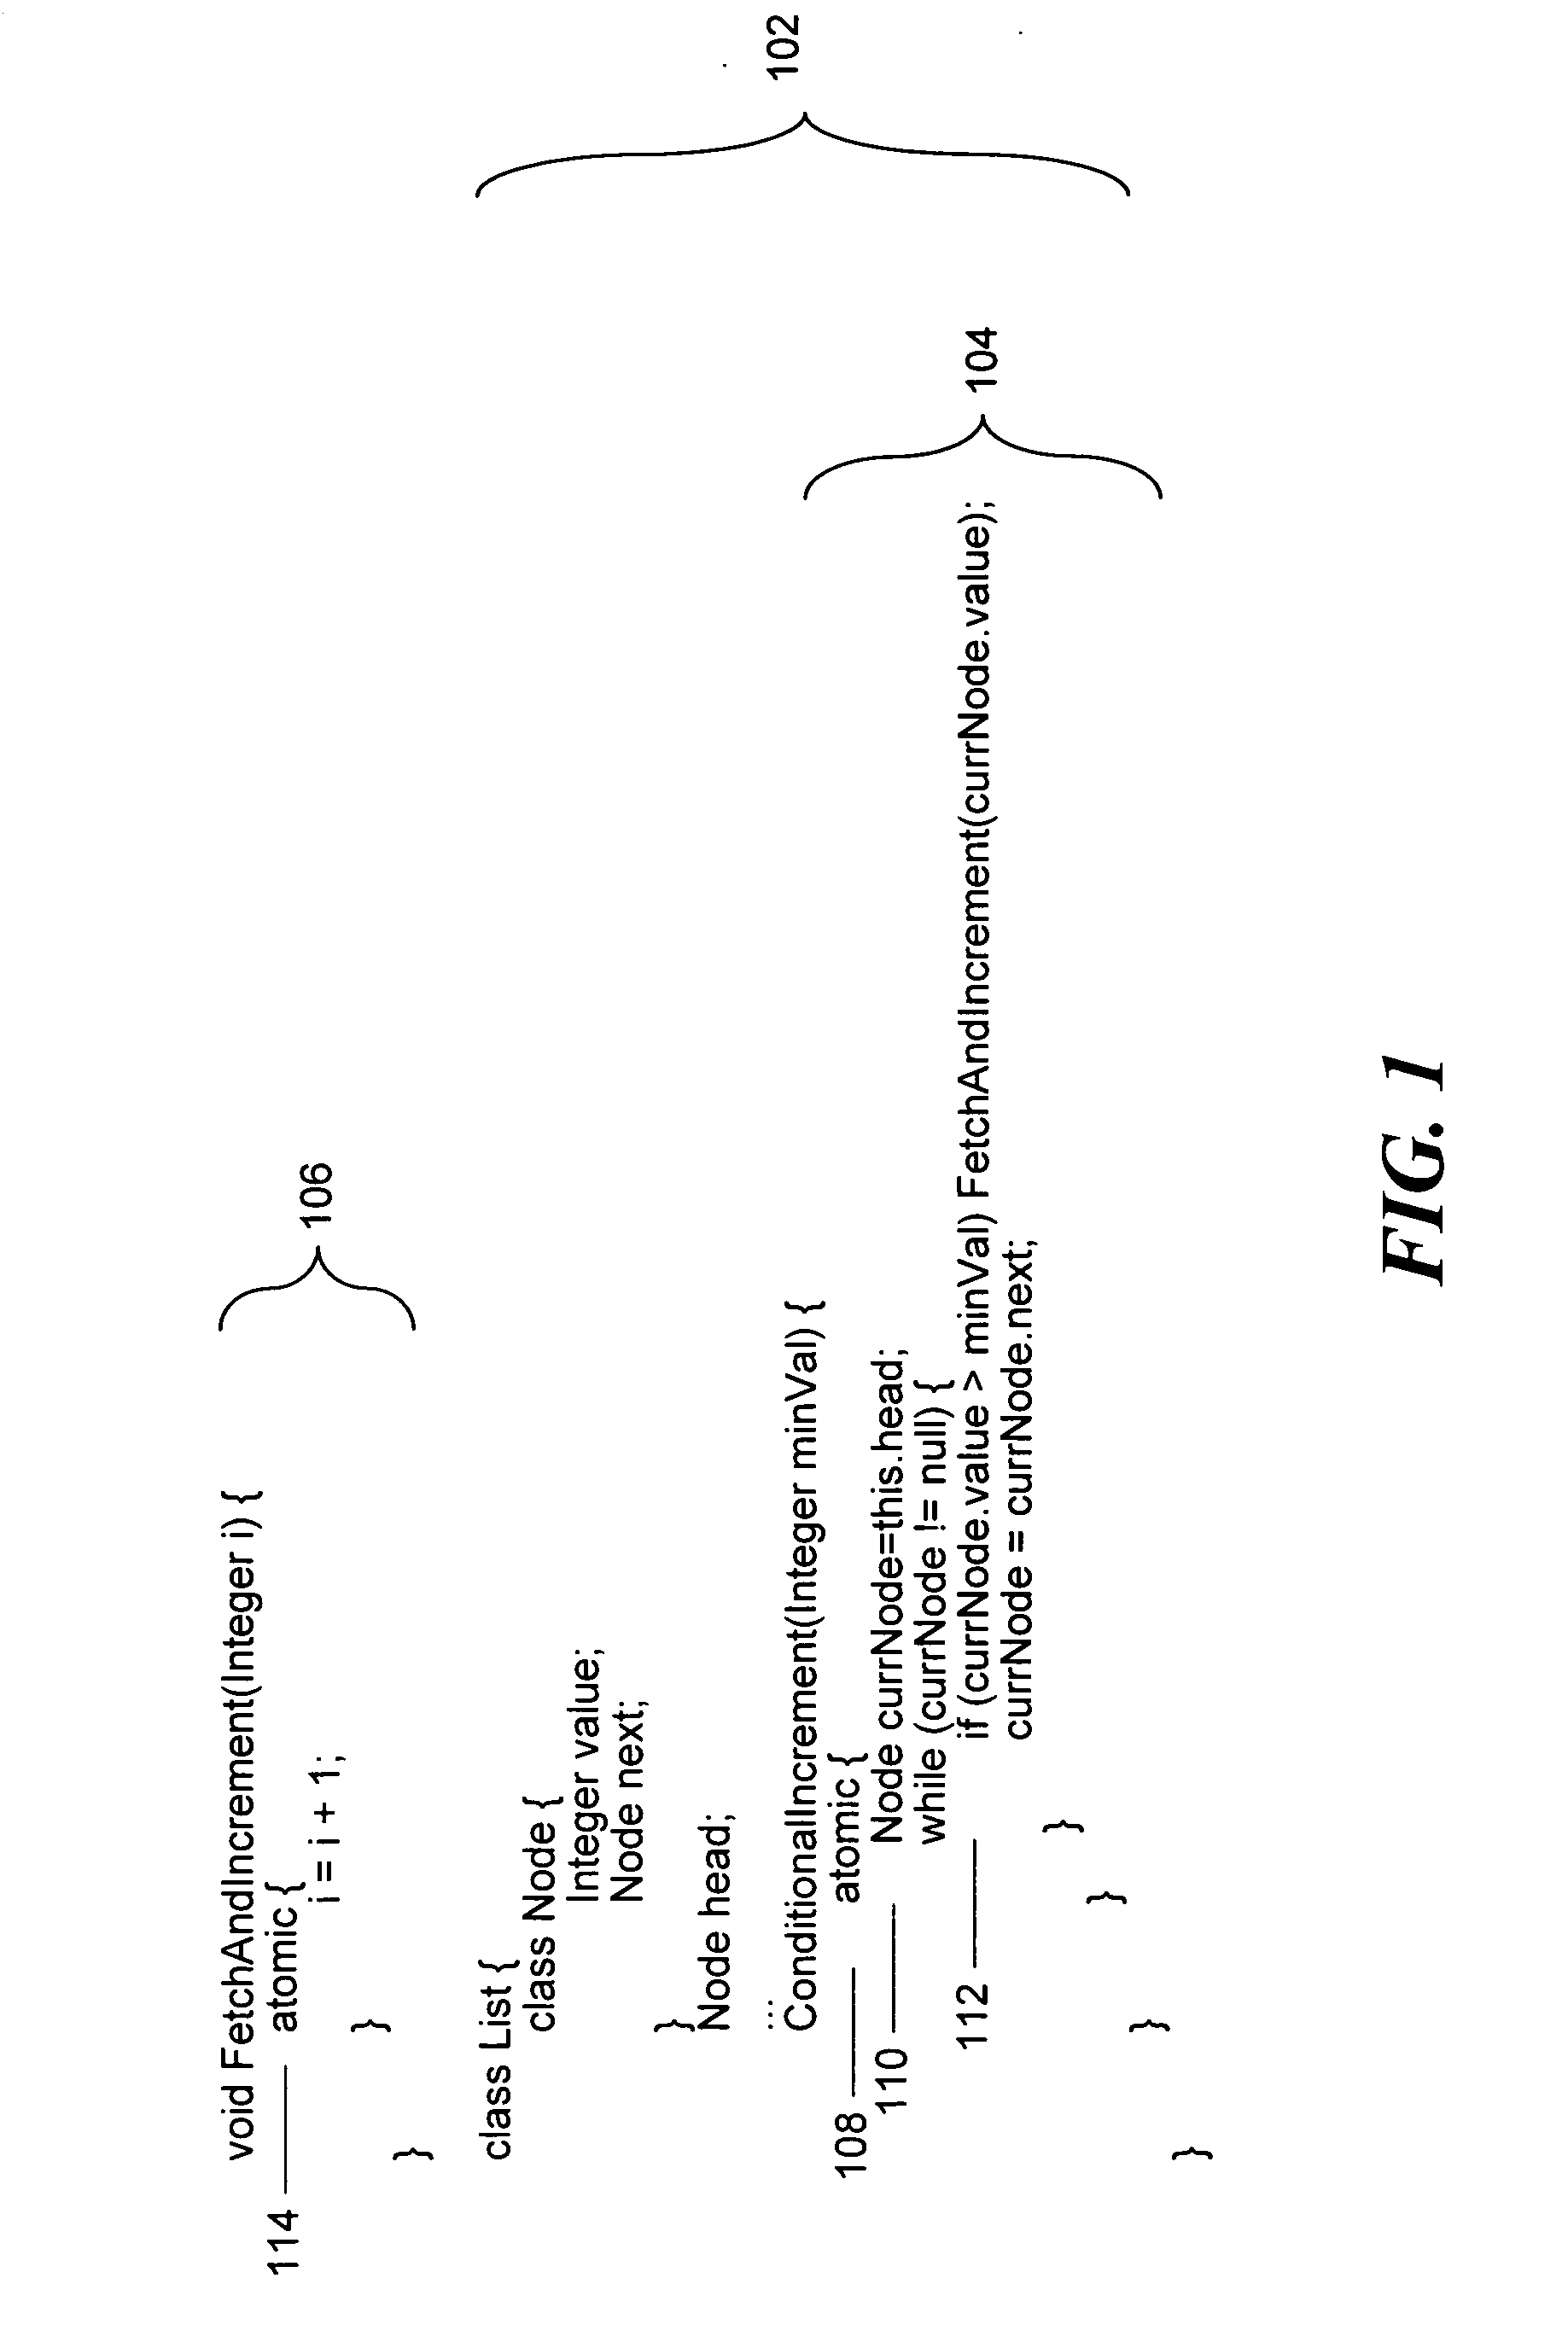 Method and apparatus for improving transactional memory interactions by tracking object visibility